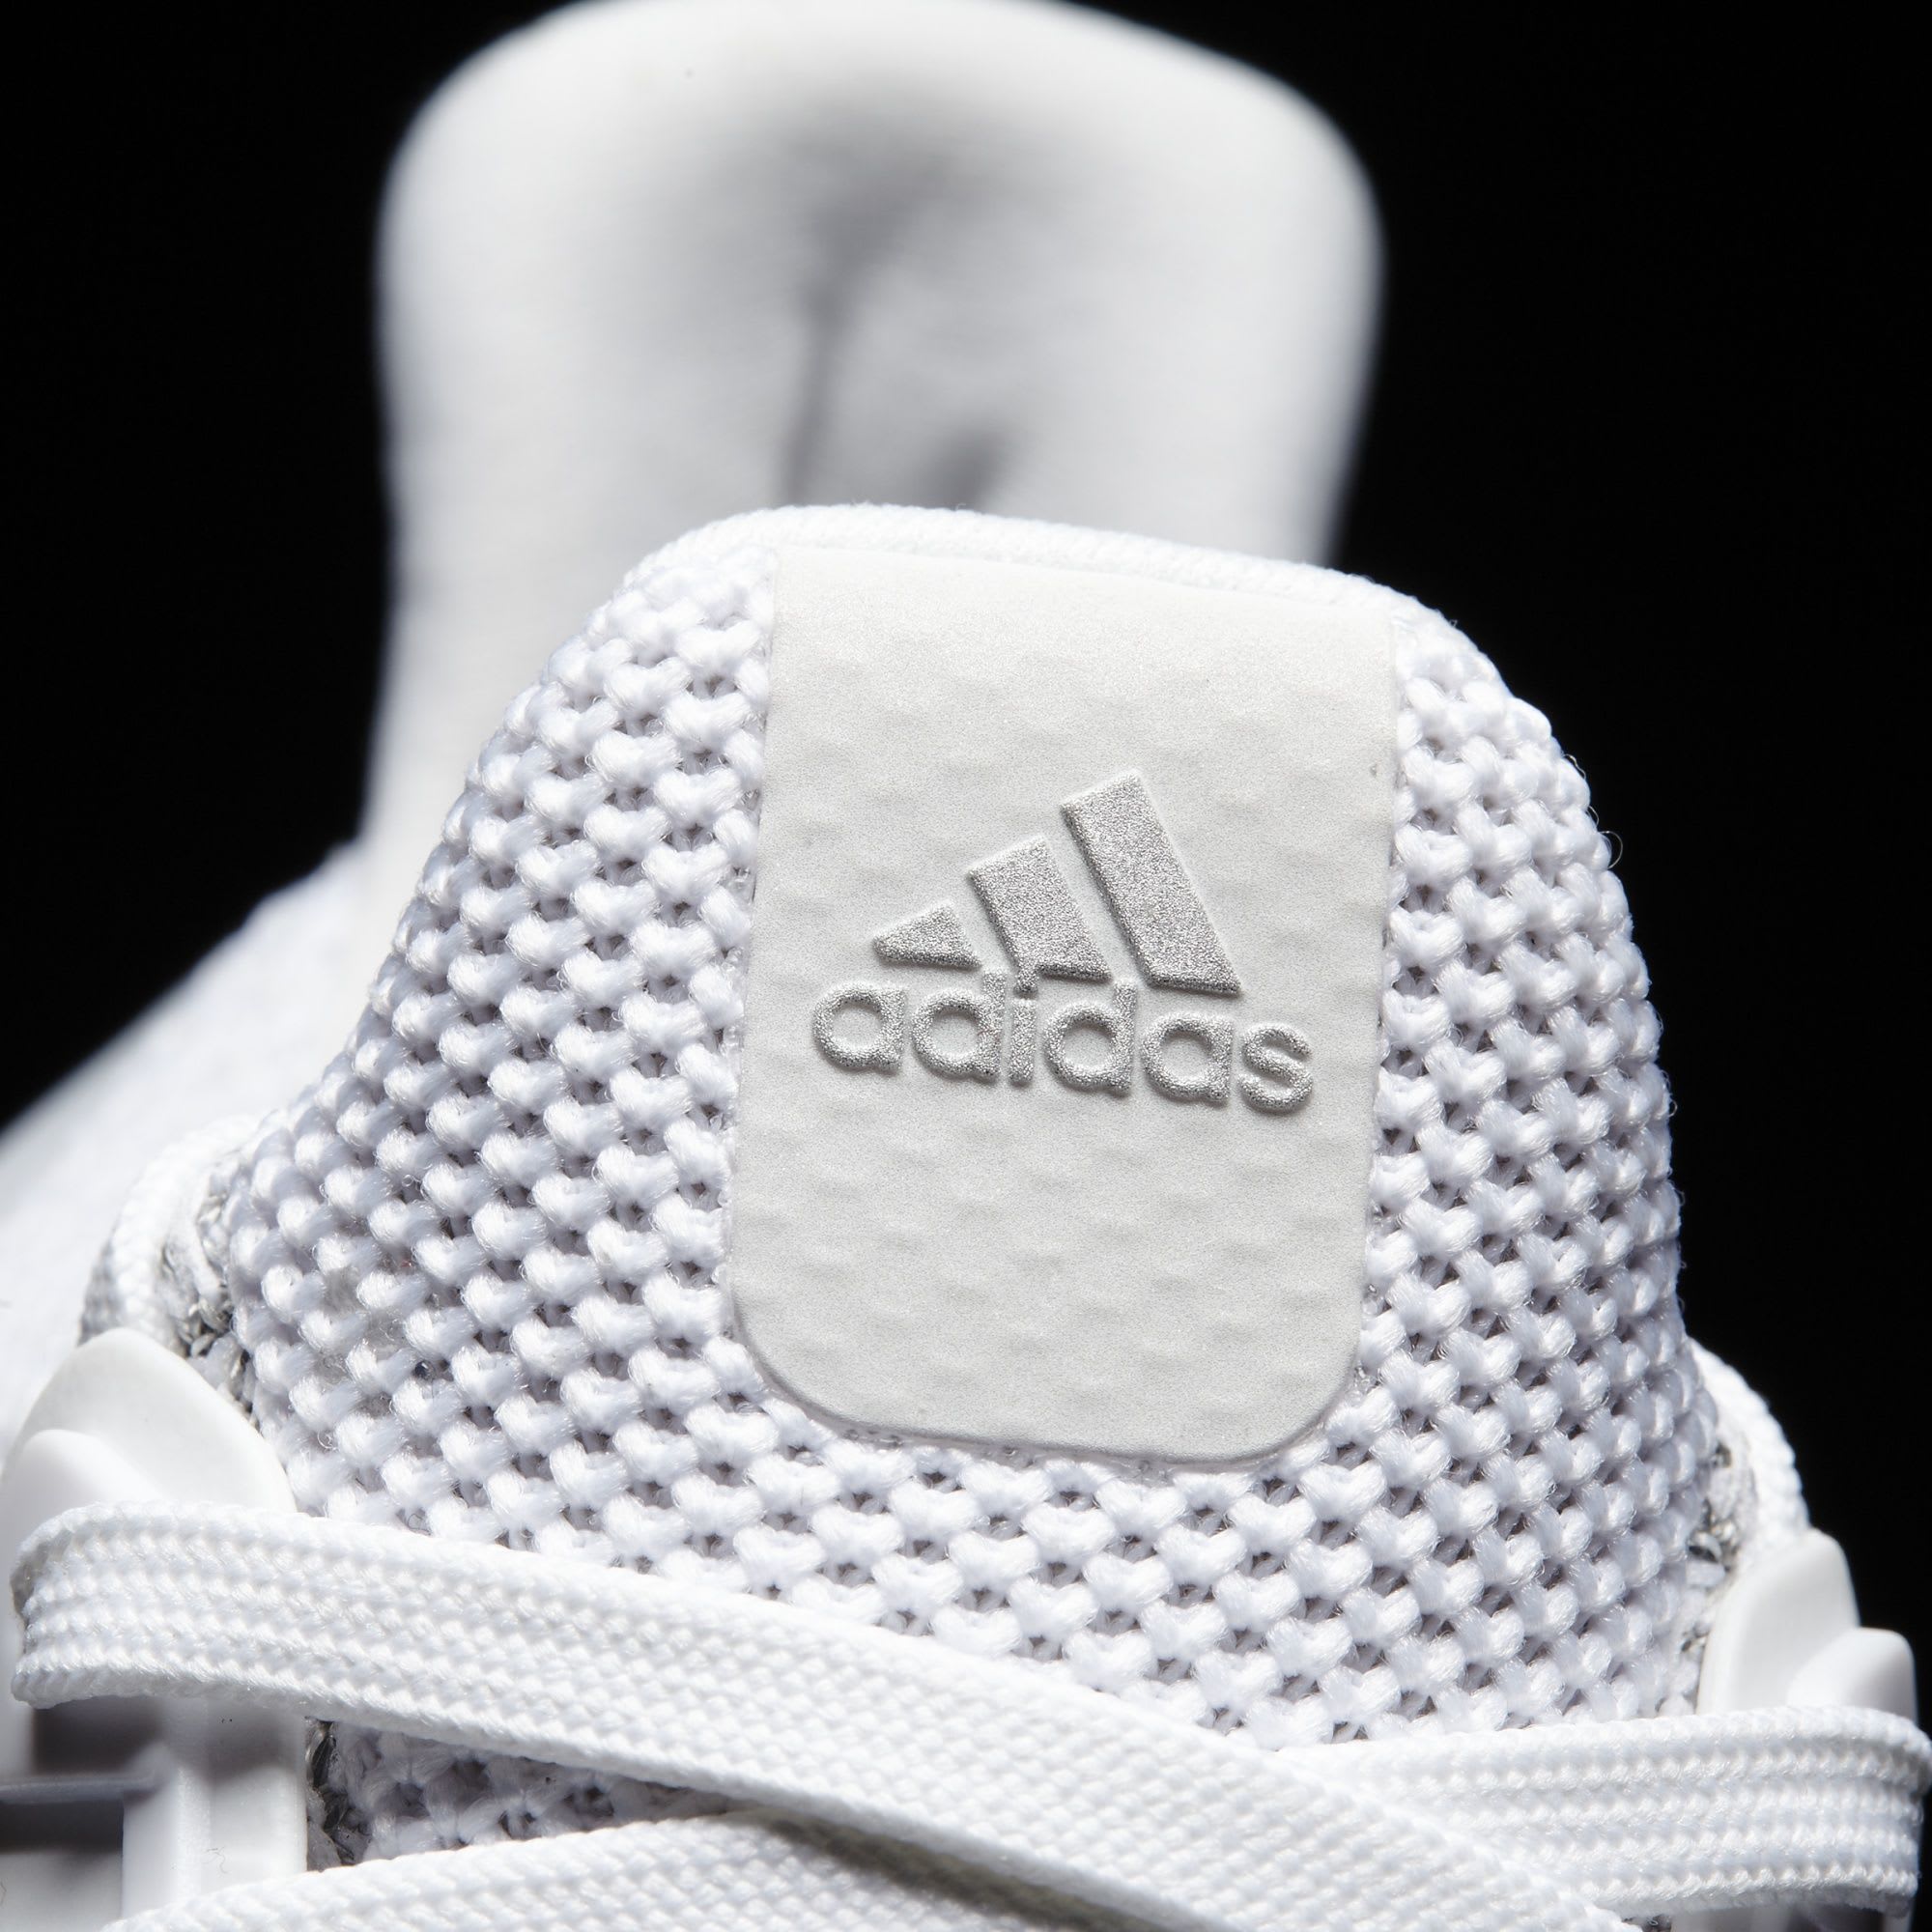 Adidas Ultra Boost 2.0 White Reflective 2018 Release Date BB3928 Tongue